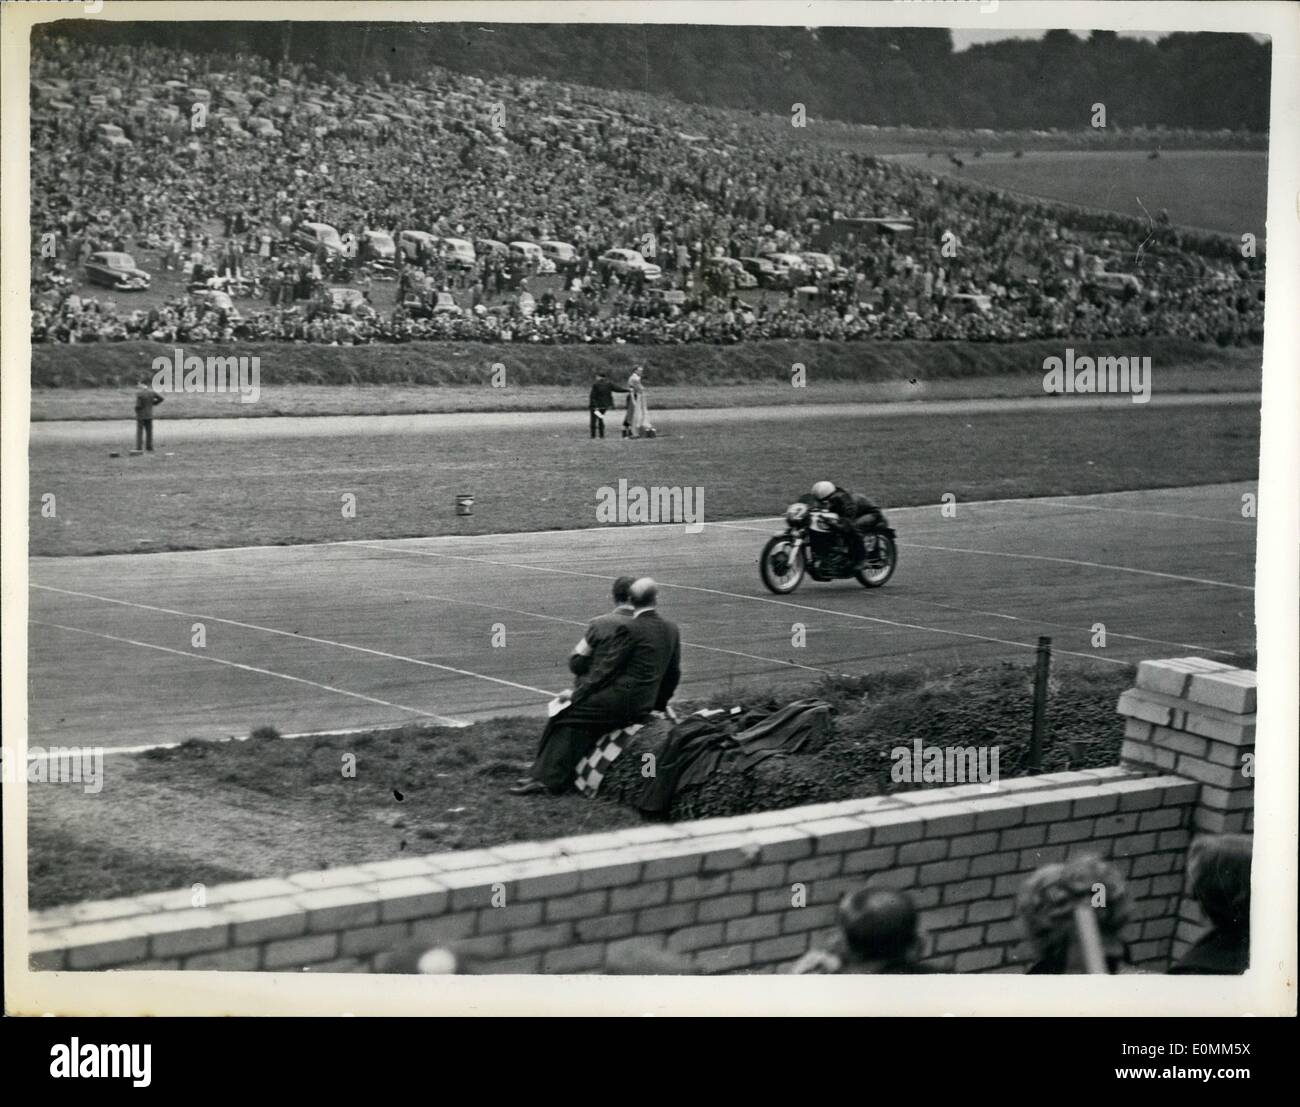 Oct. 10, 1955 - 60,000 Cheer Wonder Boy Of Motor-Cycling As He Beats World Champion Geoff Duke: It was a battle of giants and a Stock Photo